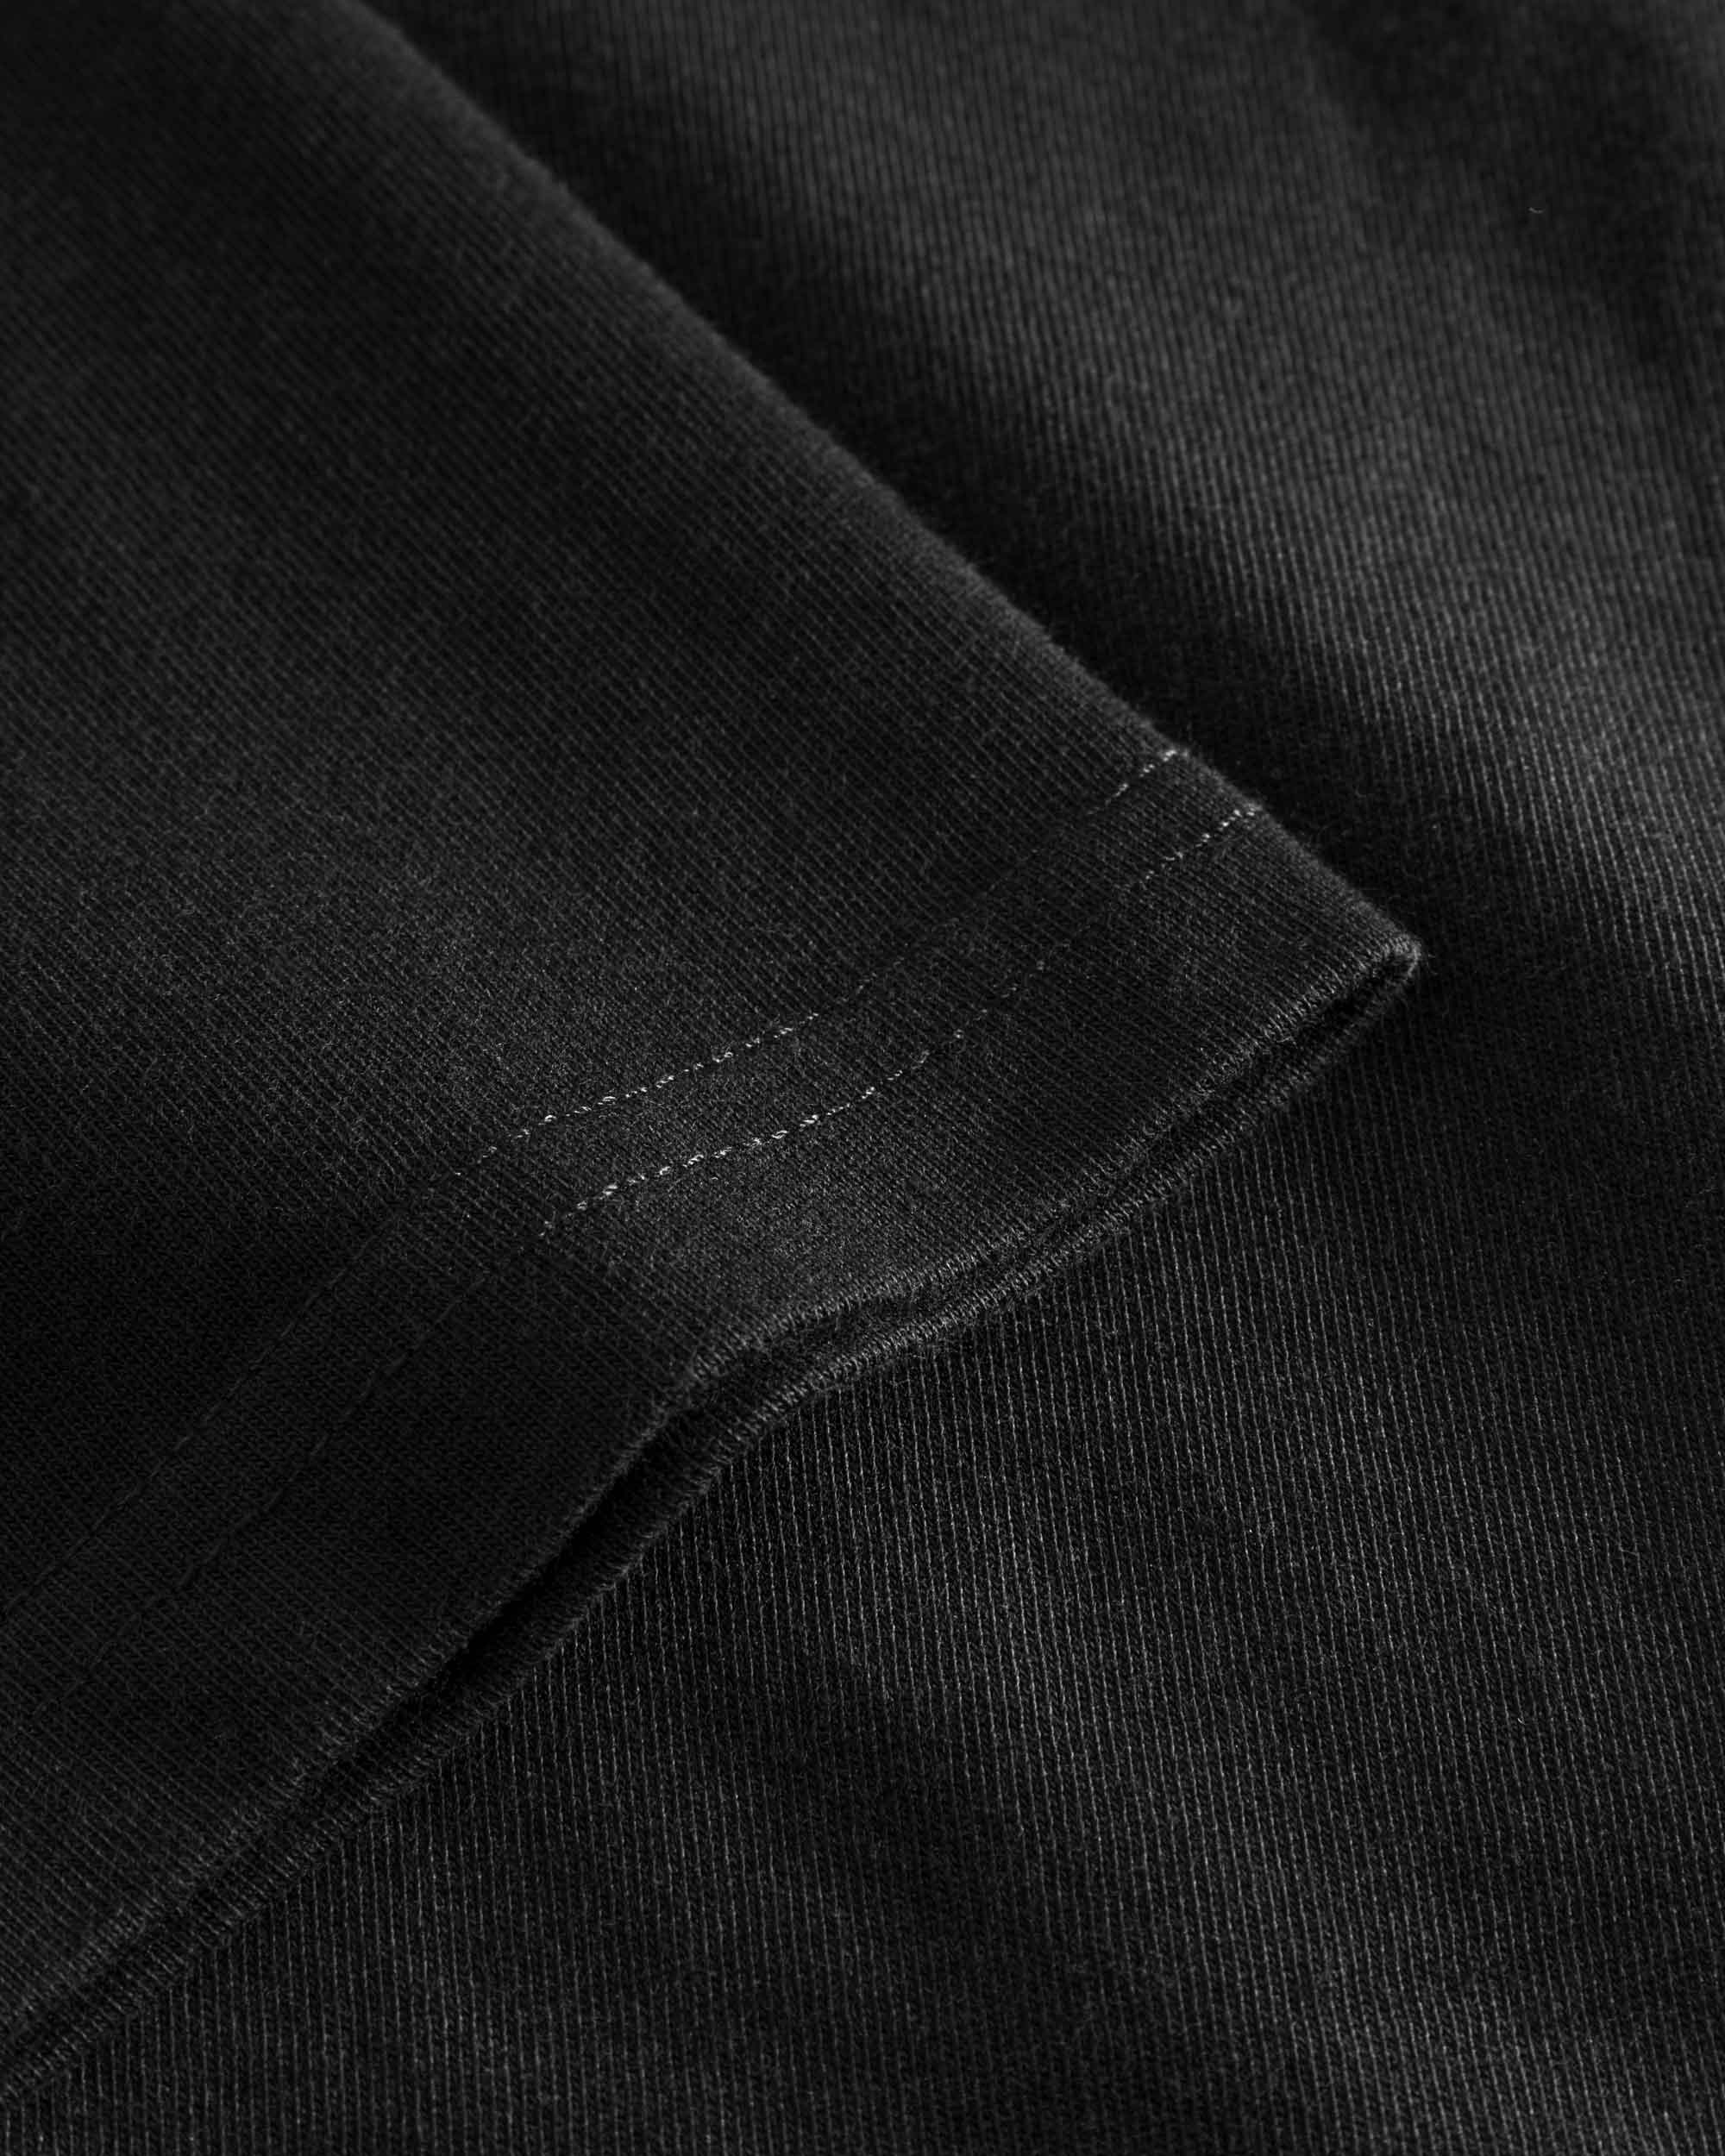 Close-up view of sleeve and stitchings on a black t-shirt